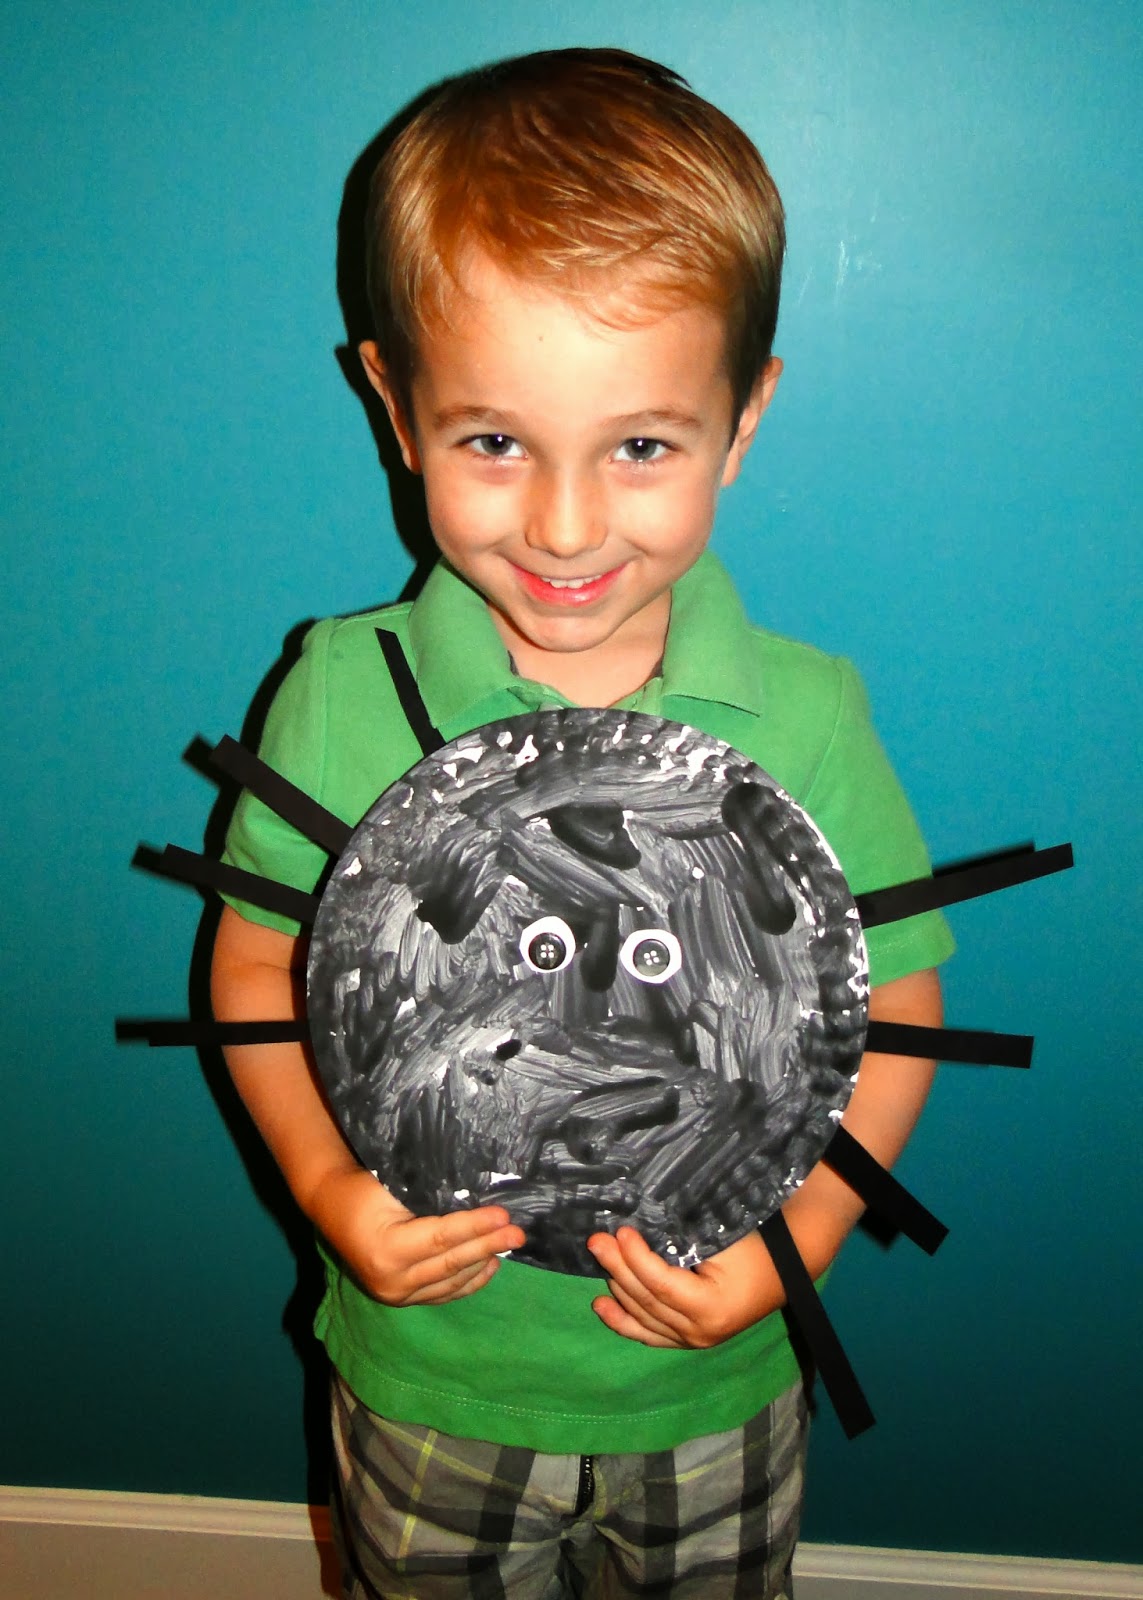 easy halloween paper plate crafts